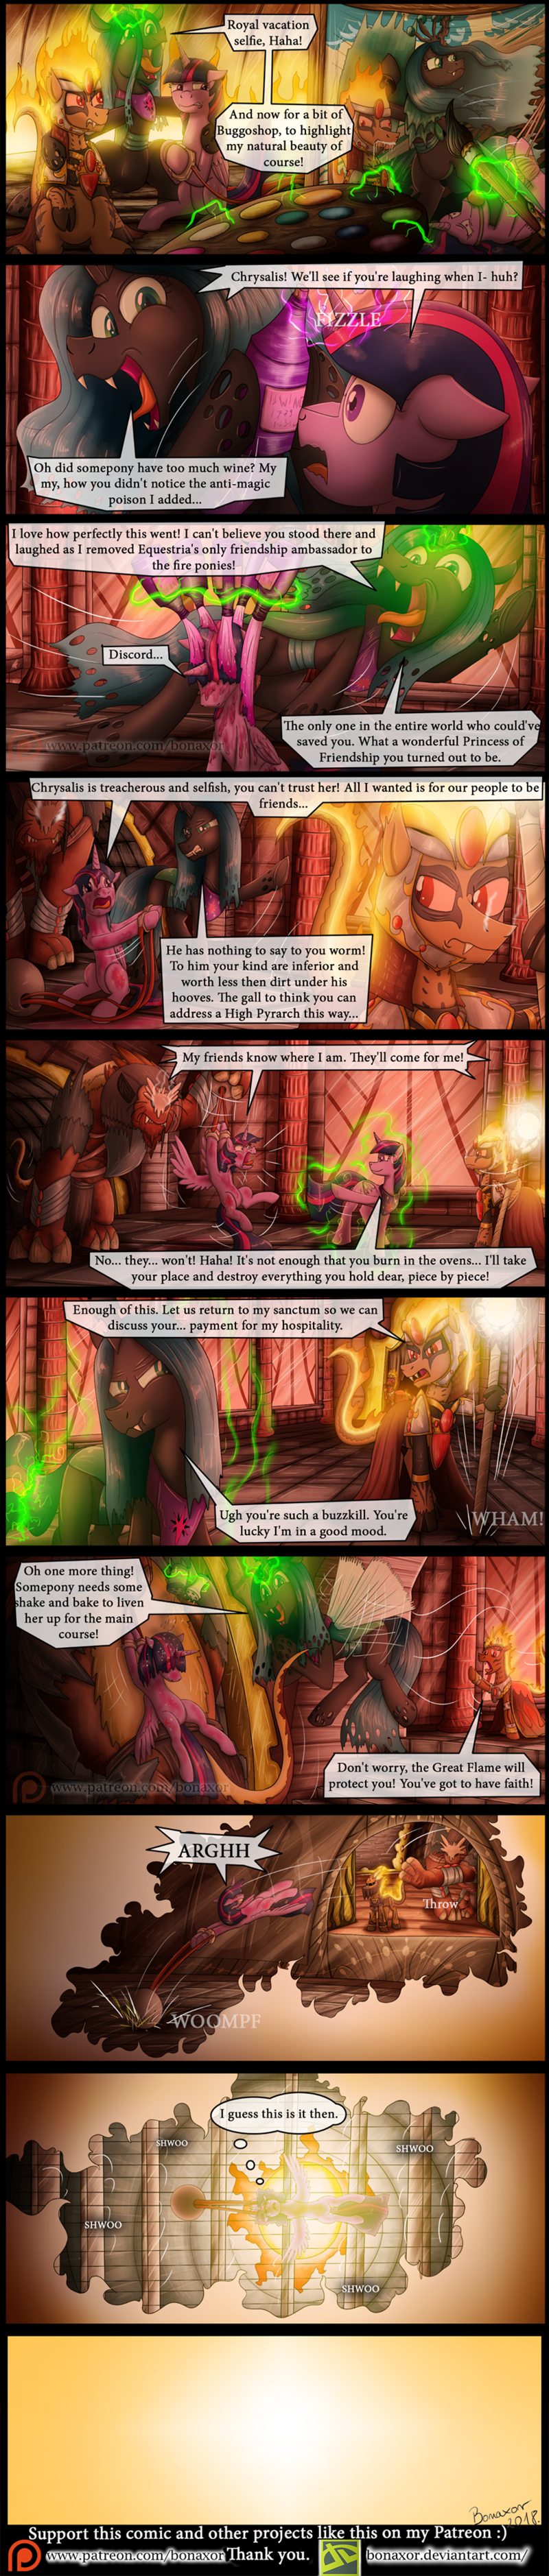 Page 17: Into the Ovens